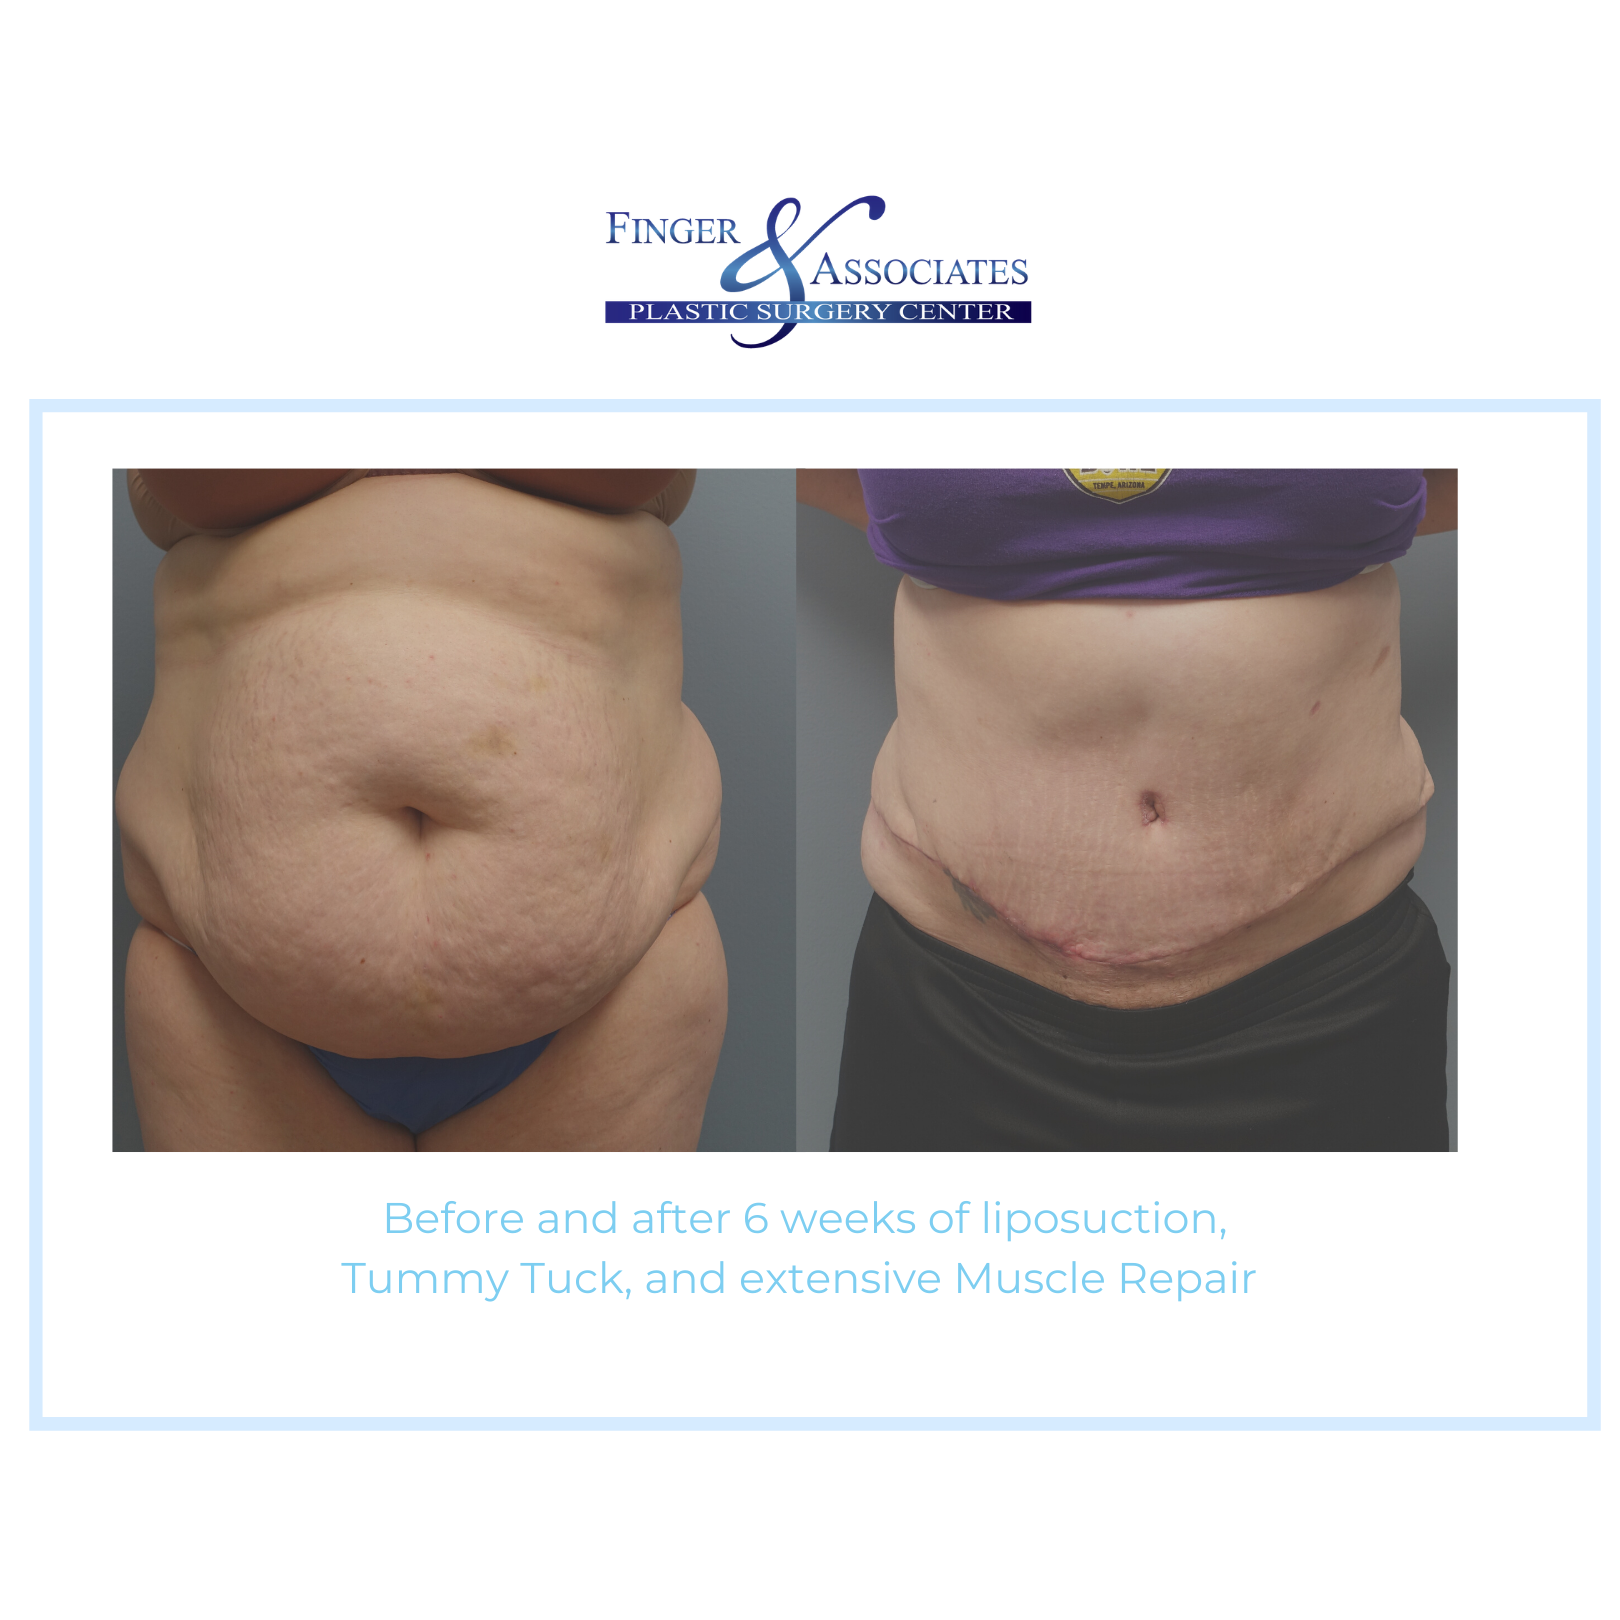 Tummy Tuck and lipo + Muscle Repair